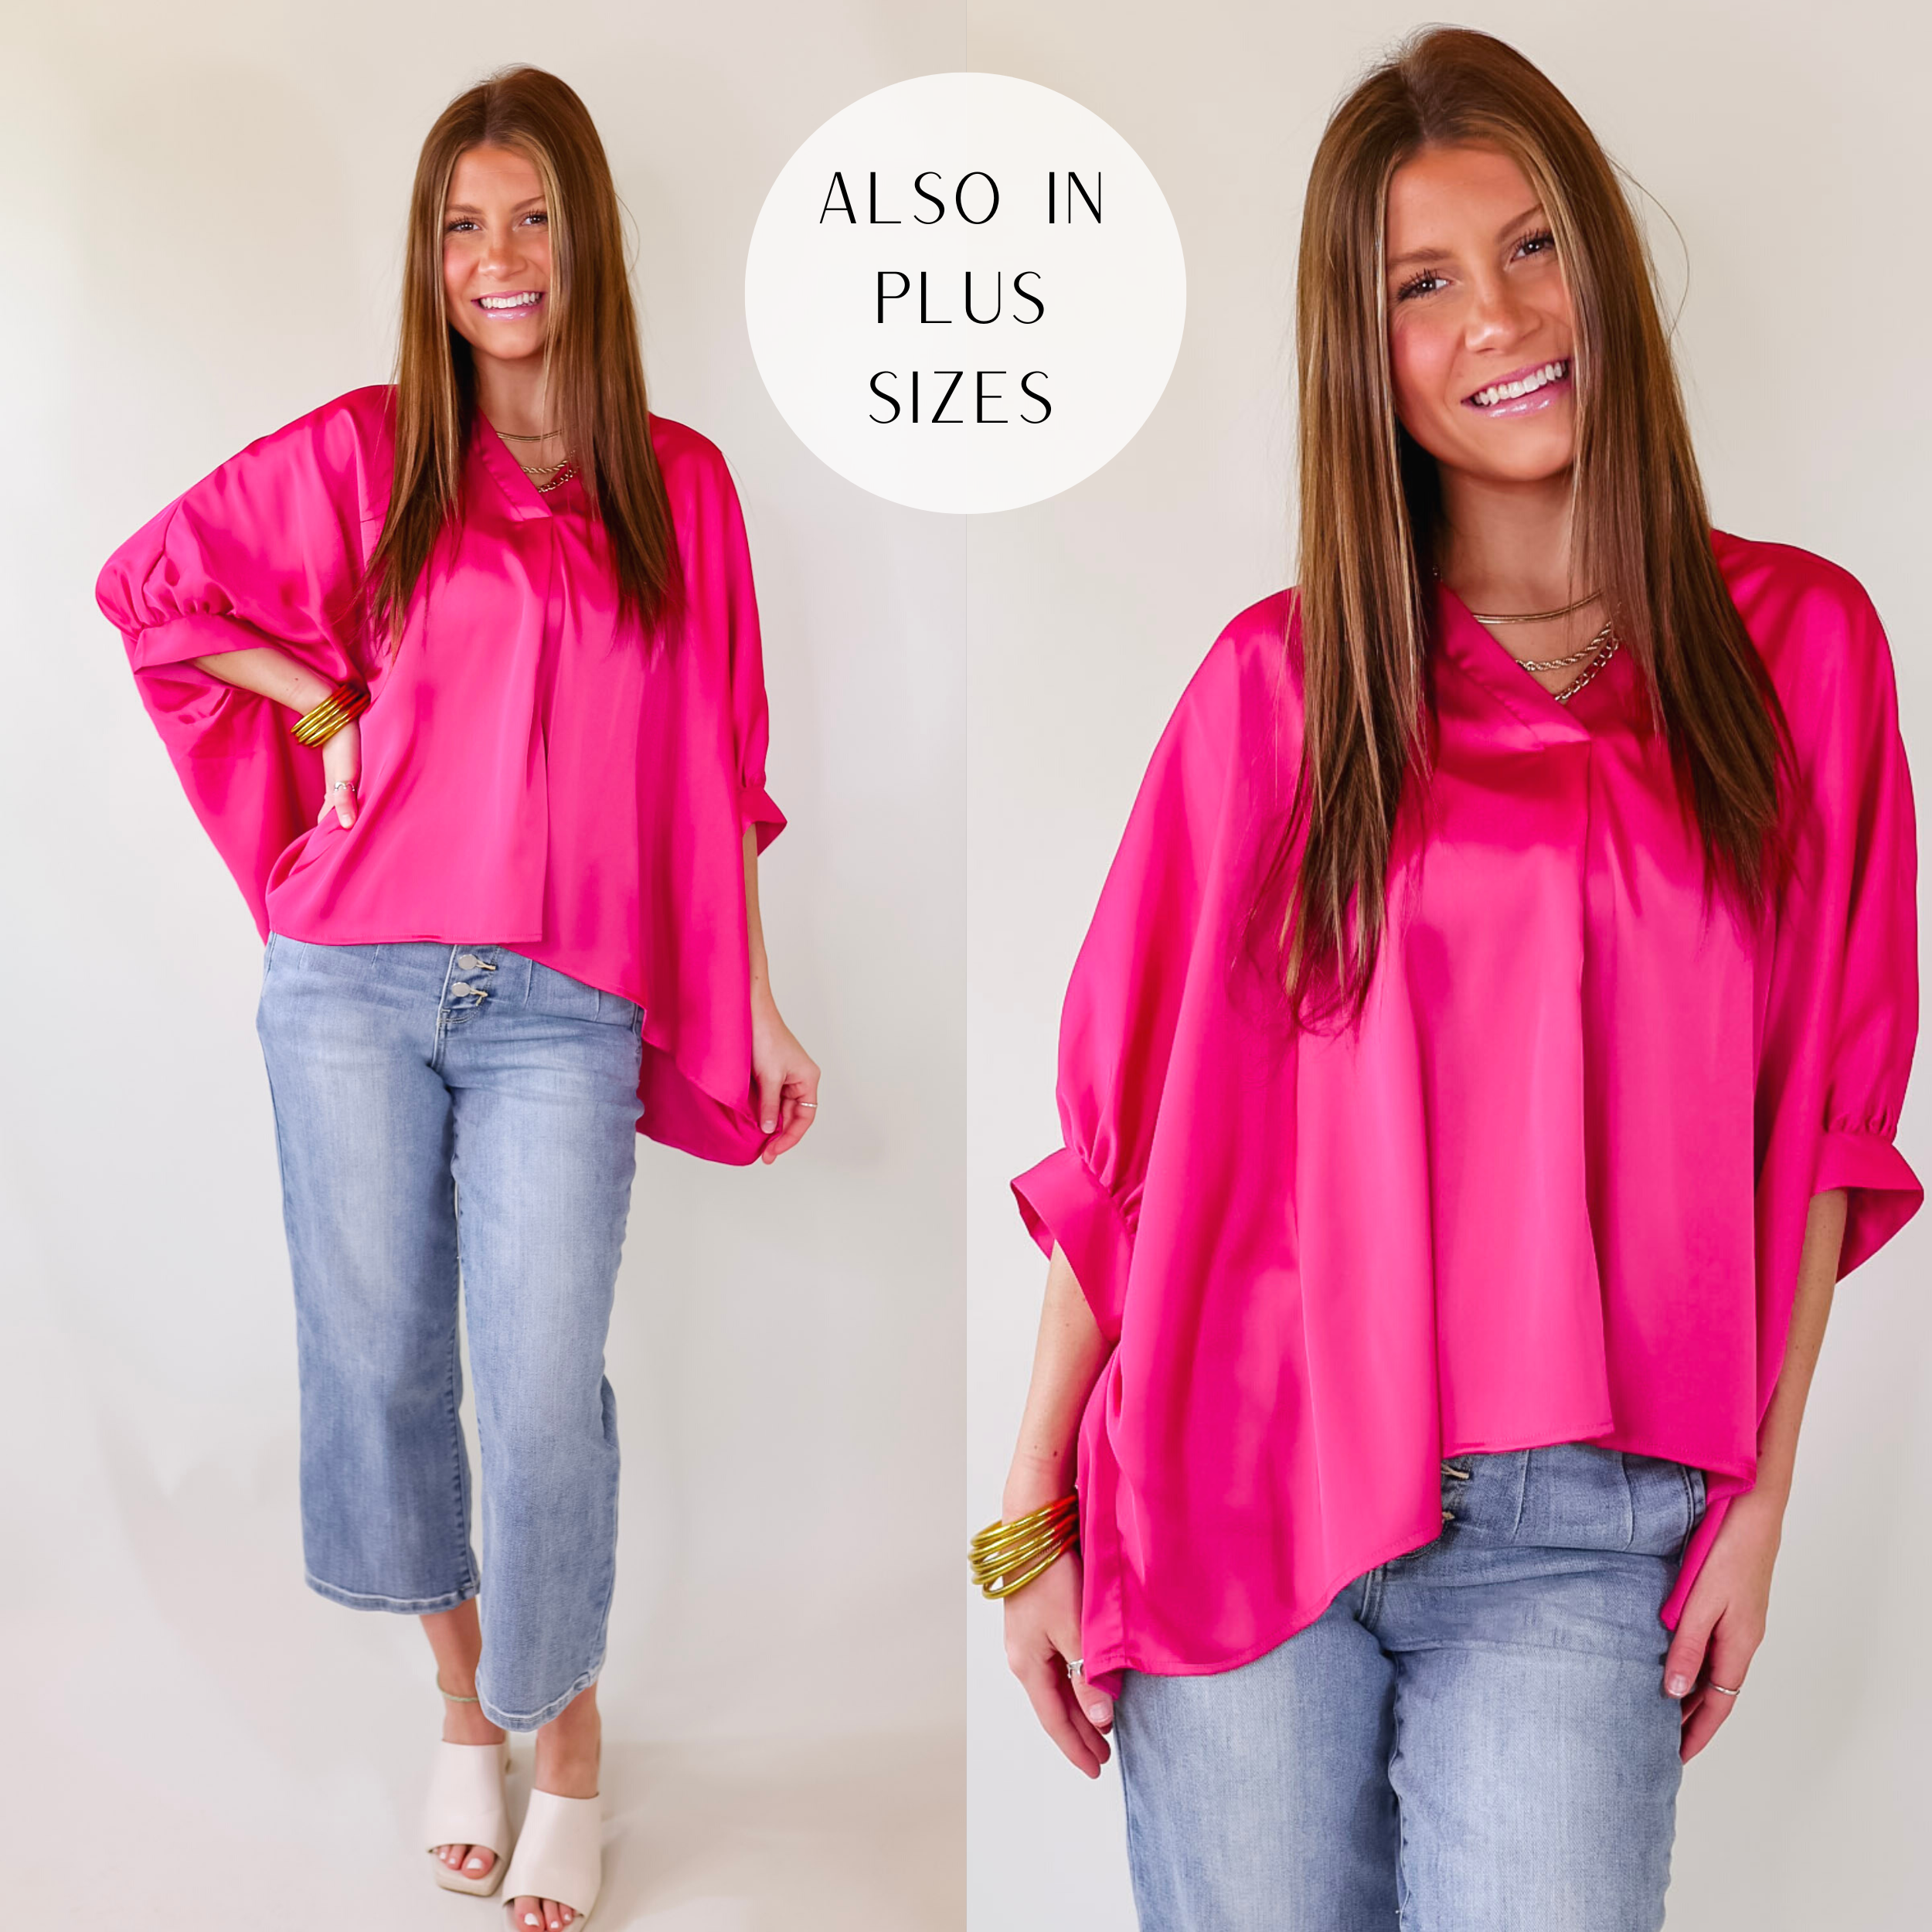 A flowy oversized fuchsia blouse featuring a silky fabric, a V neckline, and cuffed sleeves.